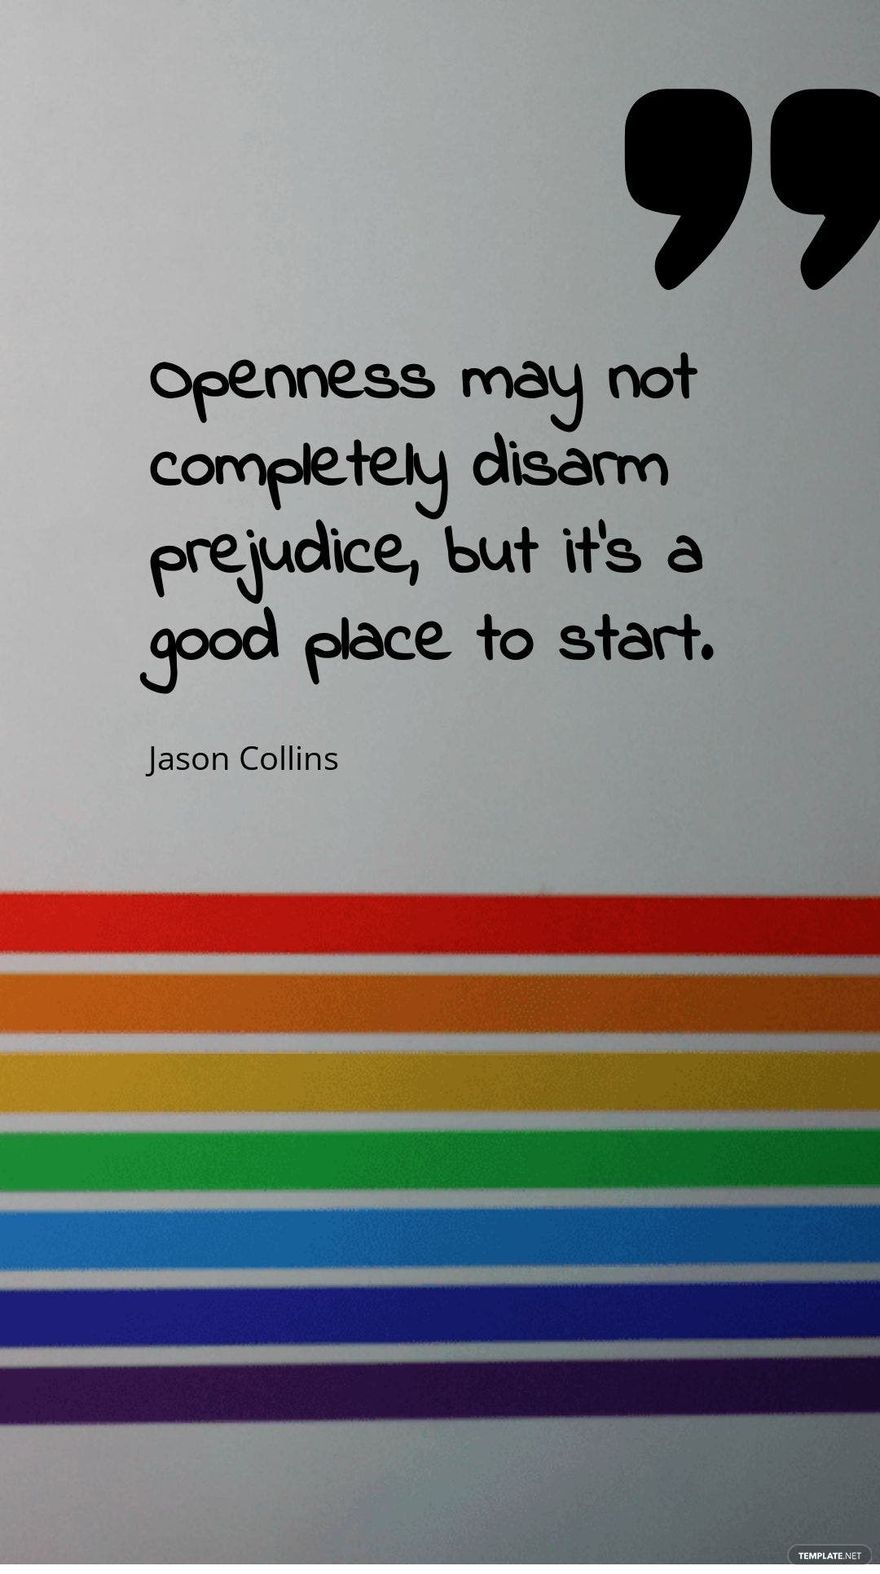 Free Jason Collins - Openness may not completely disarm prejudice, but it's a good place to start. in JPG